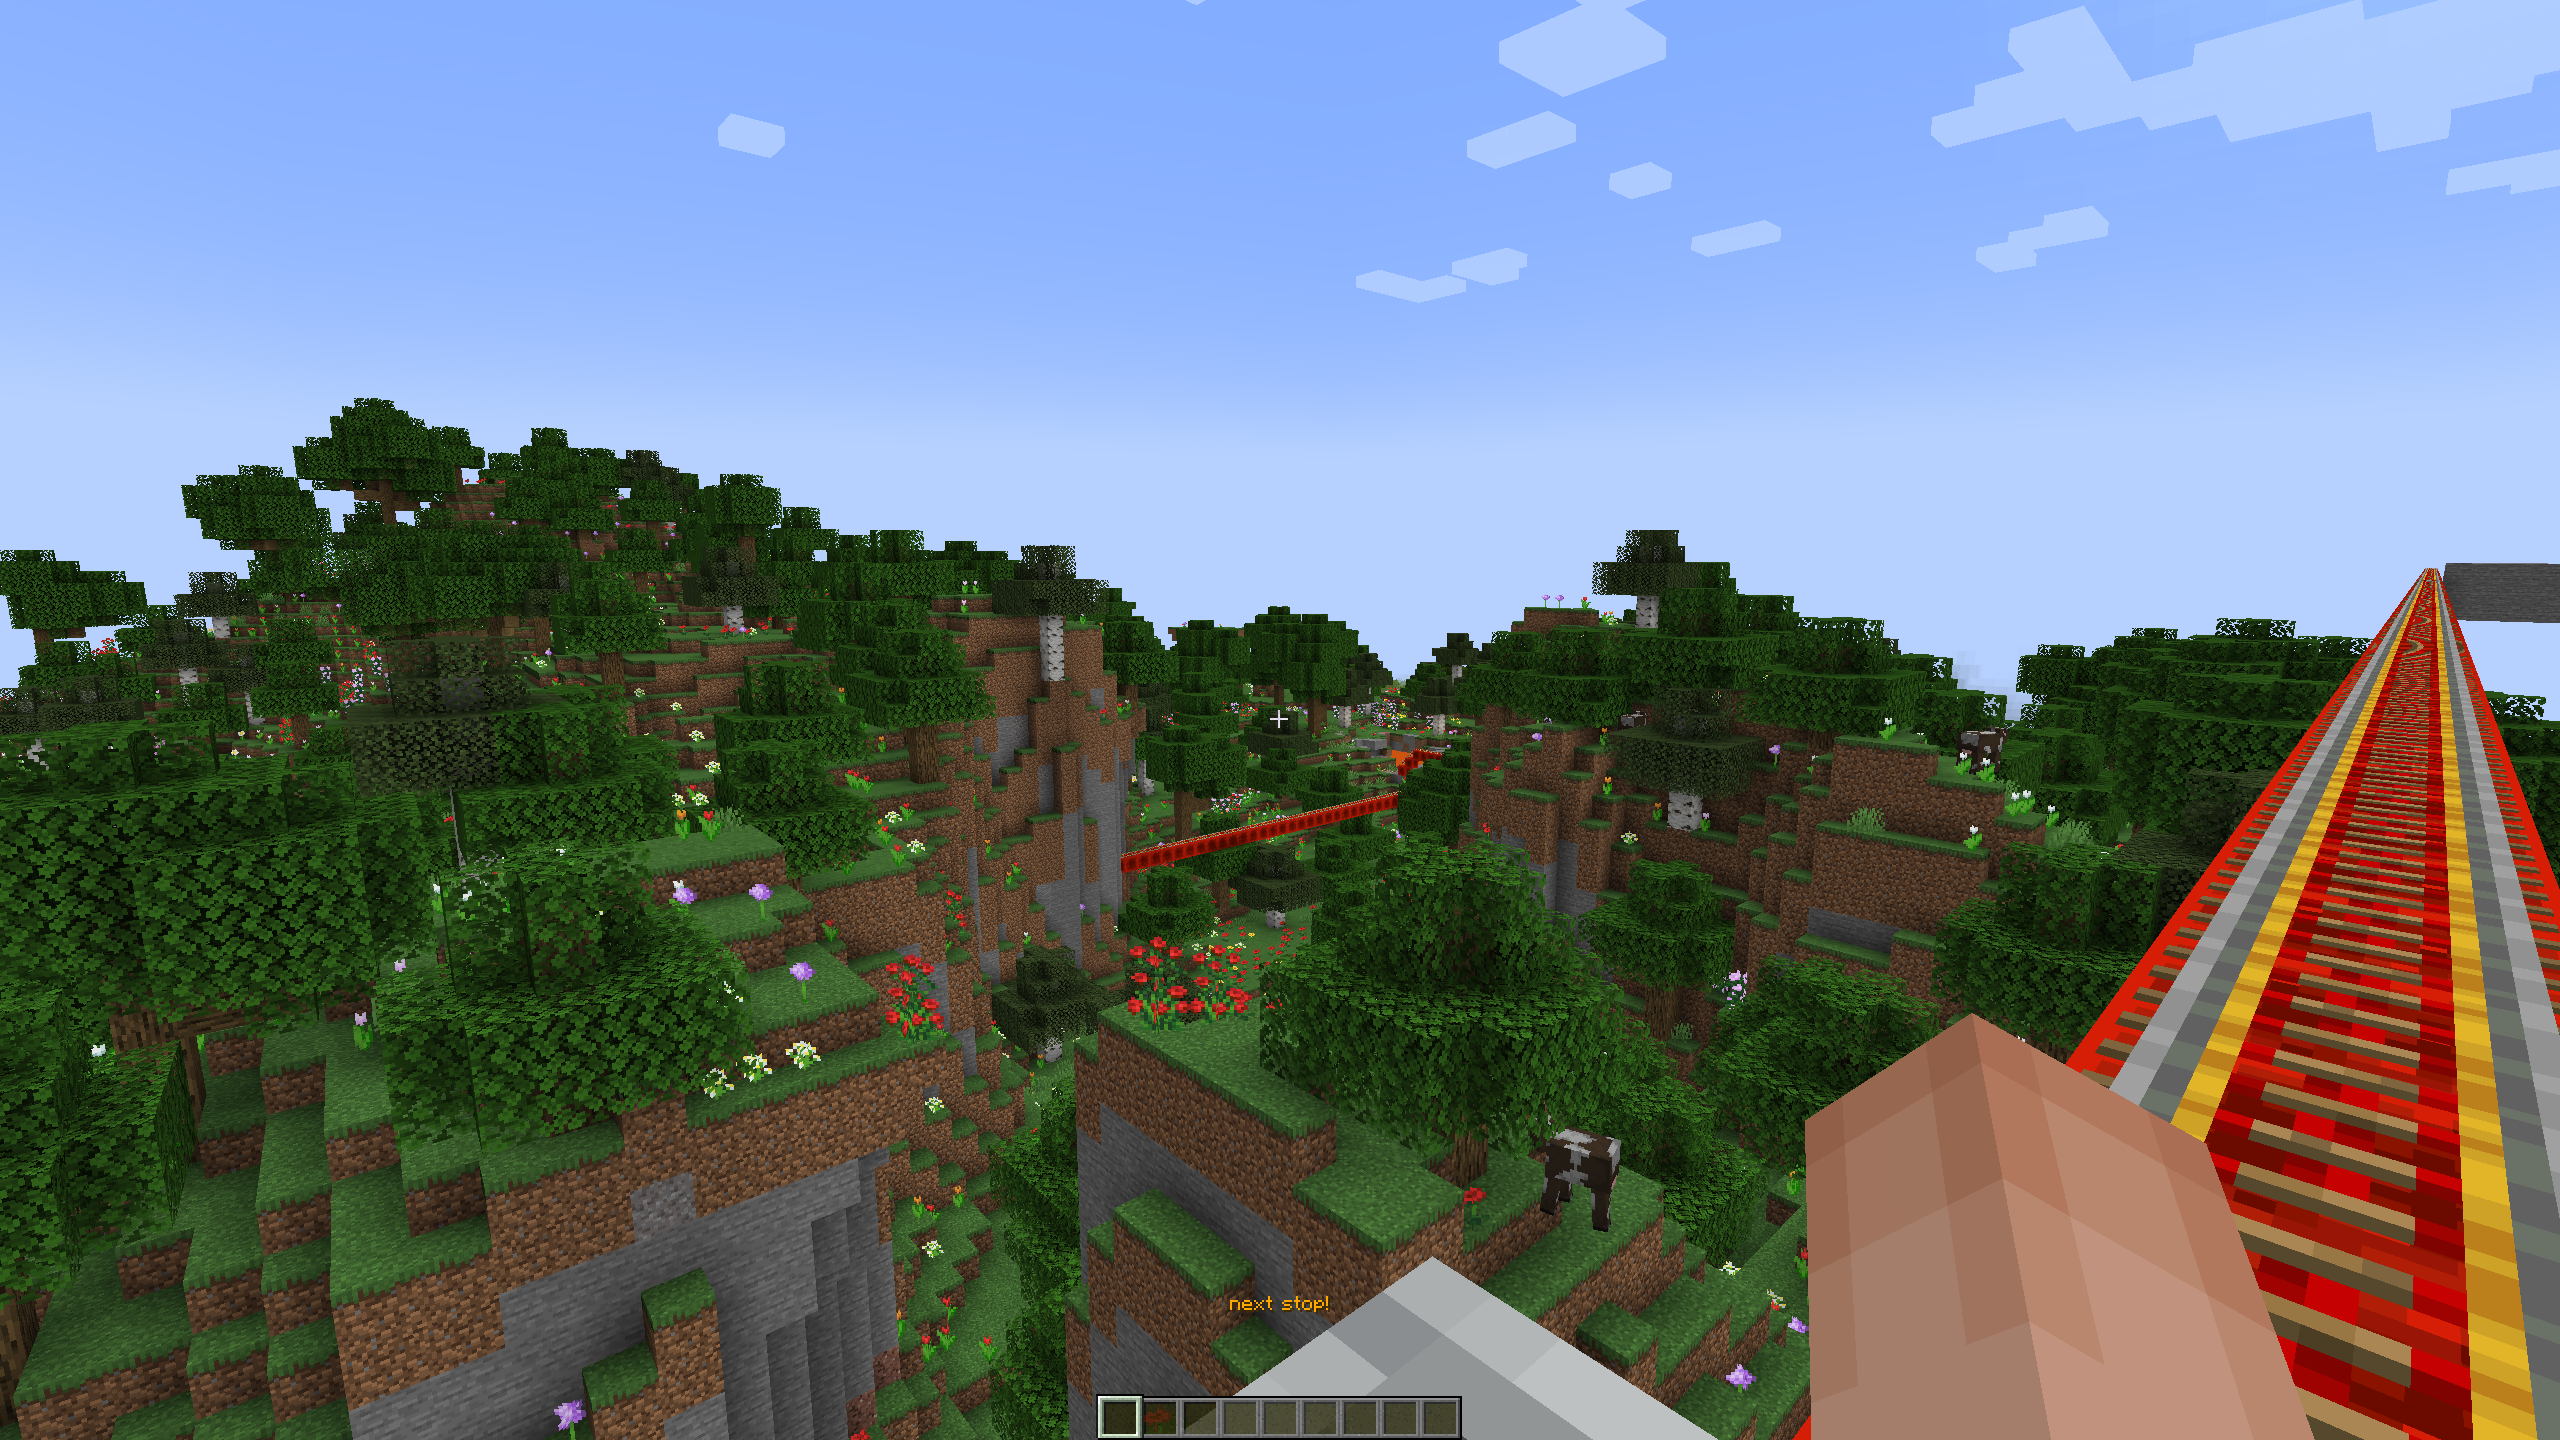 a picture taken while travelling along a minecart track on an automated railway system